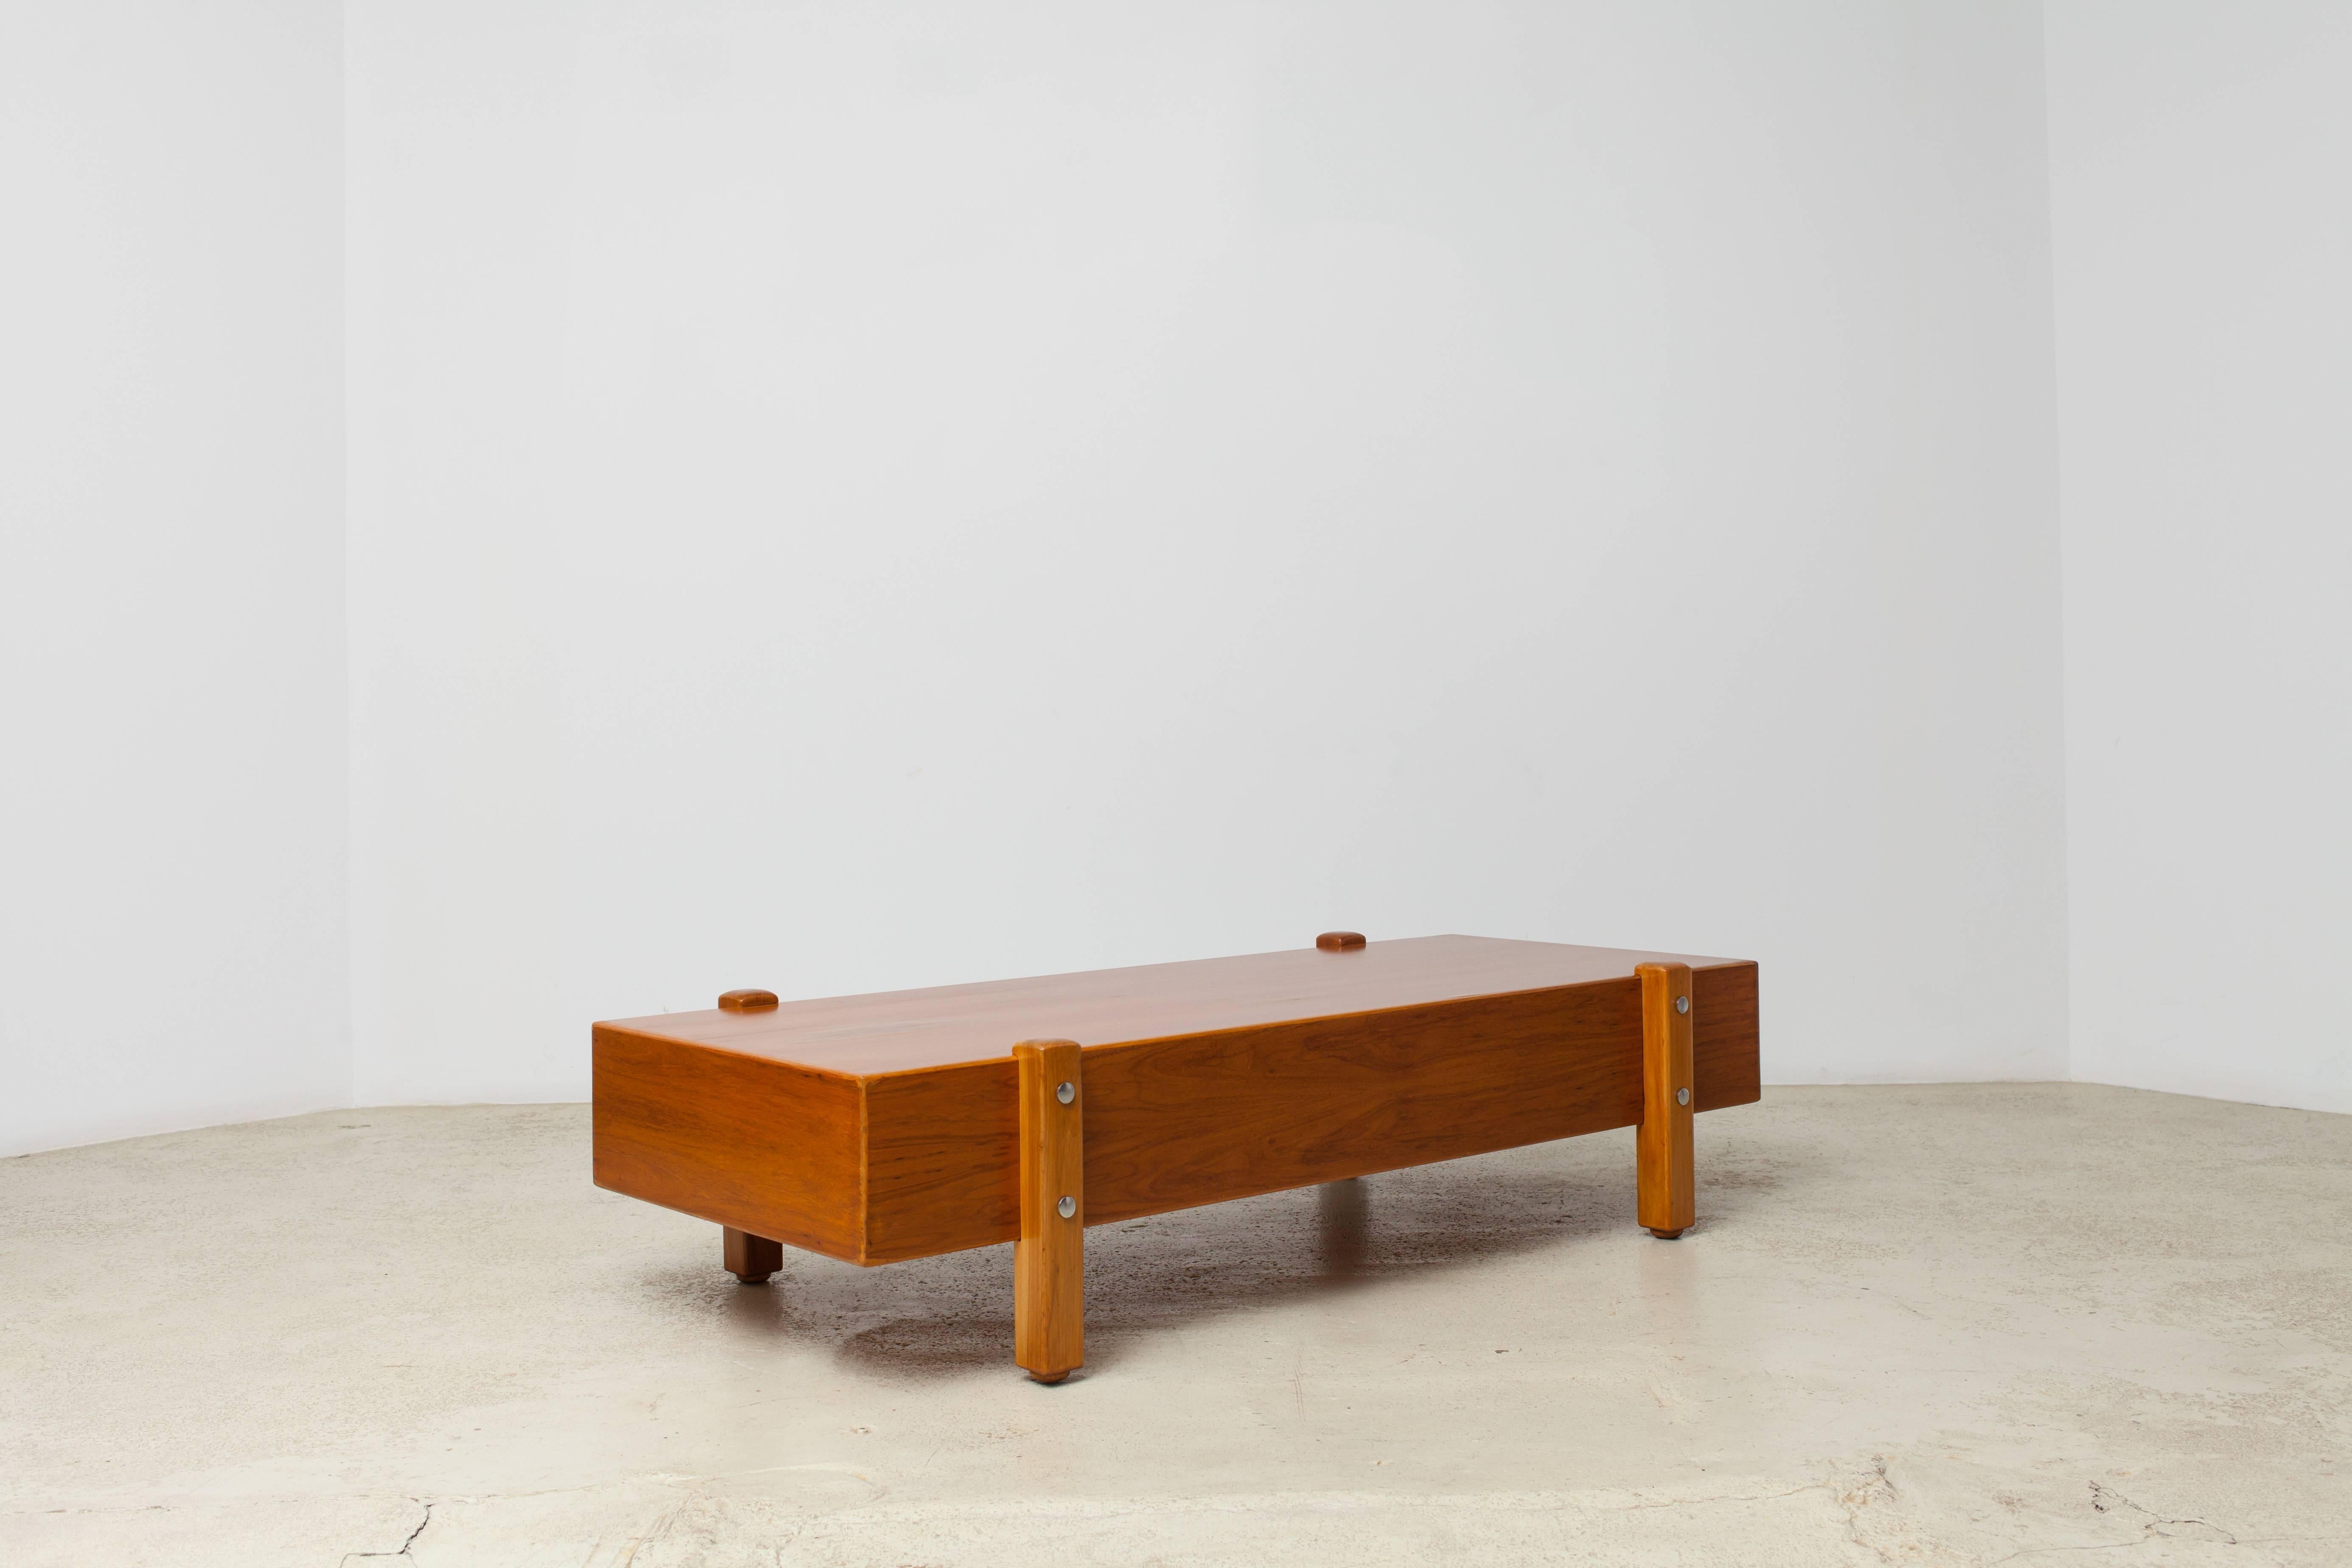 A rare vintage coffee table by master Sergio Rodrigues.
Caviúna wood veneer, solid wood legs, chromed buttons.
Can also be used as a coffee table.